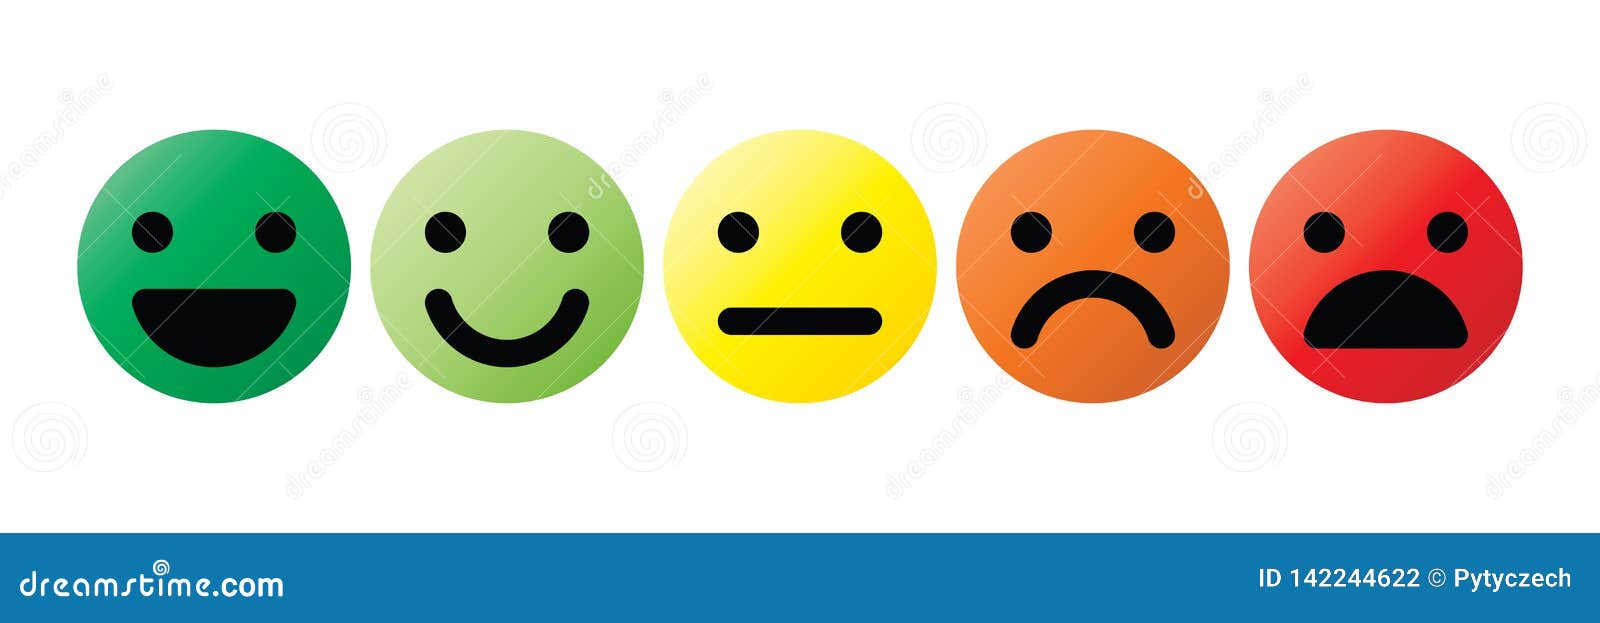 Rating Scale Or Pain Scale In The Form Of Emoticons. From Red To Green ...